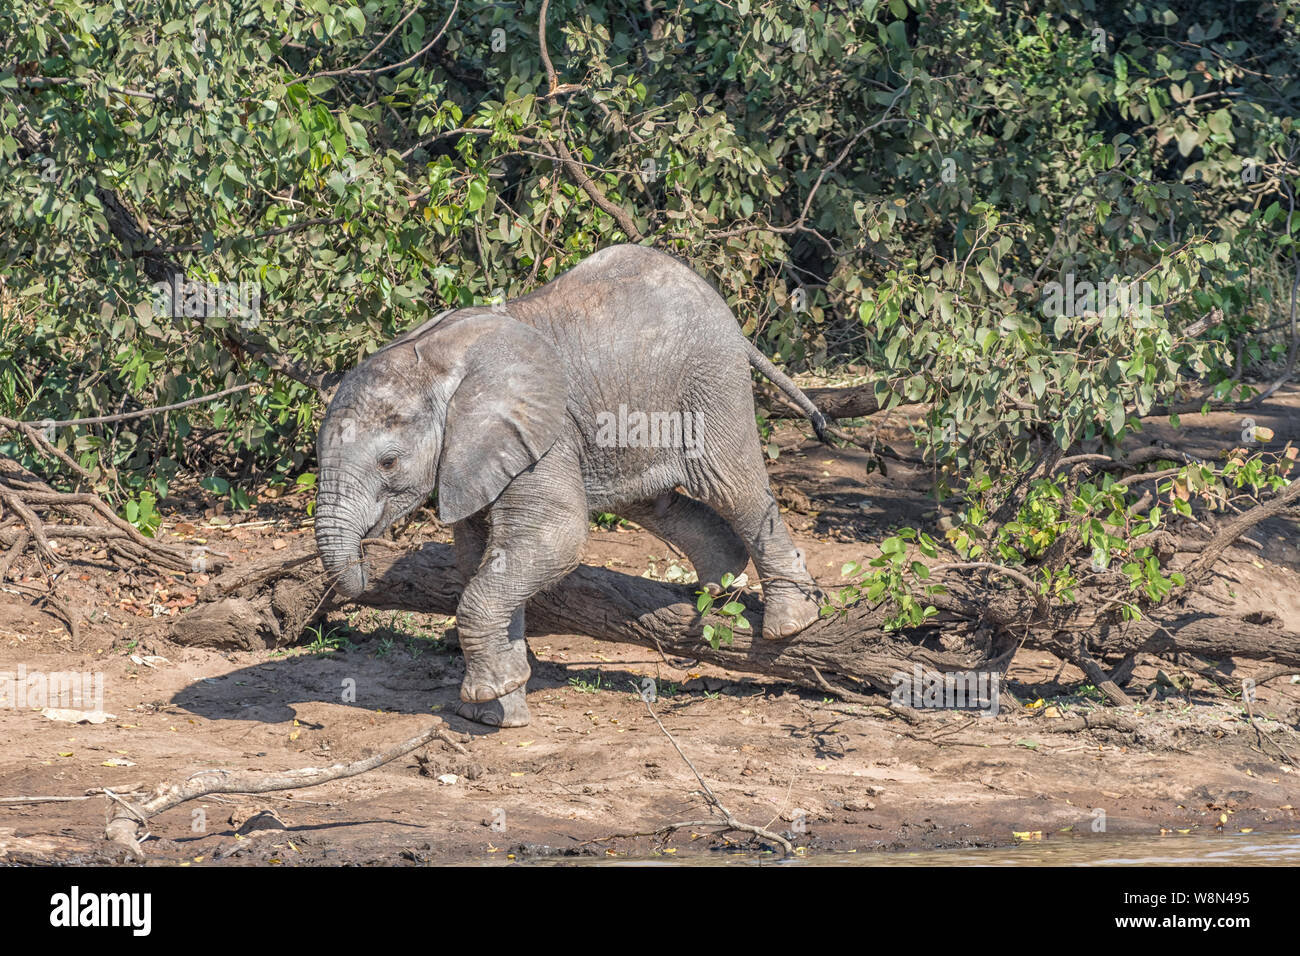 A small male African Elephant calf climbing over a tree stump holding a ...